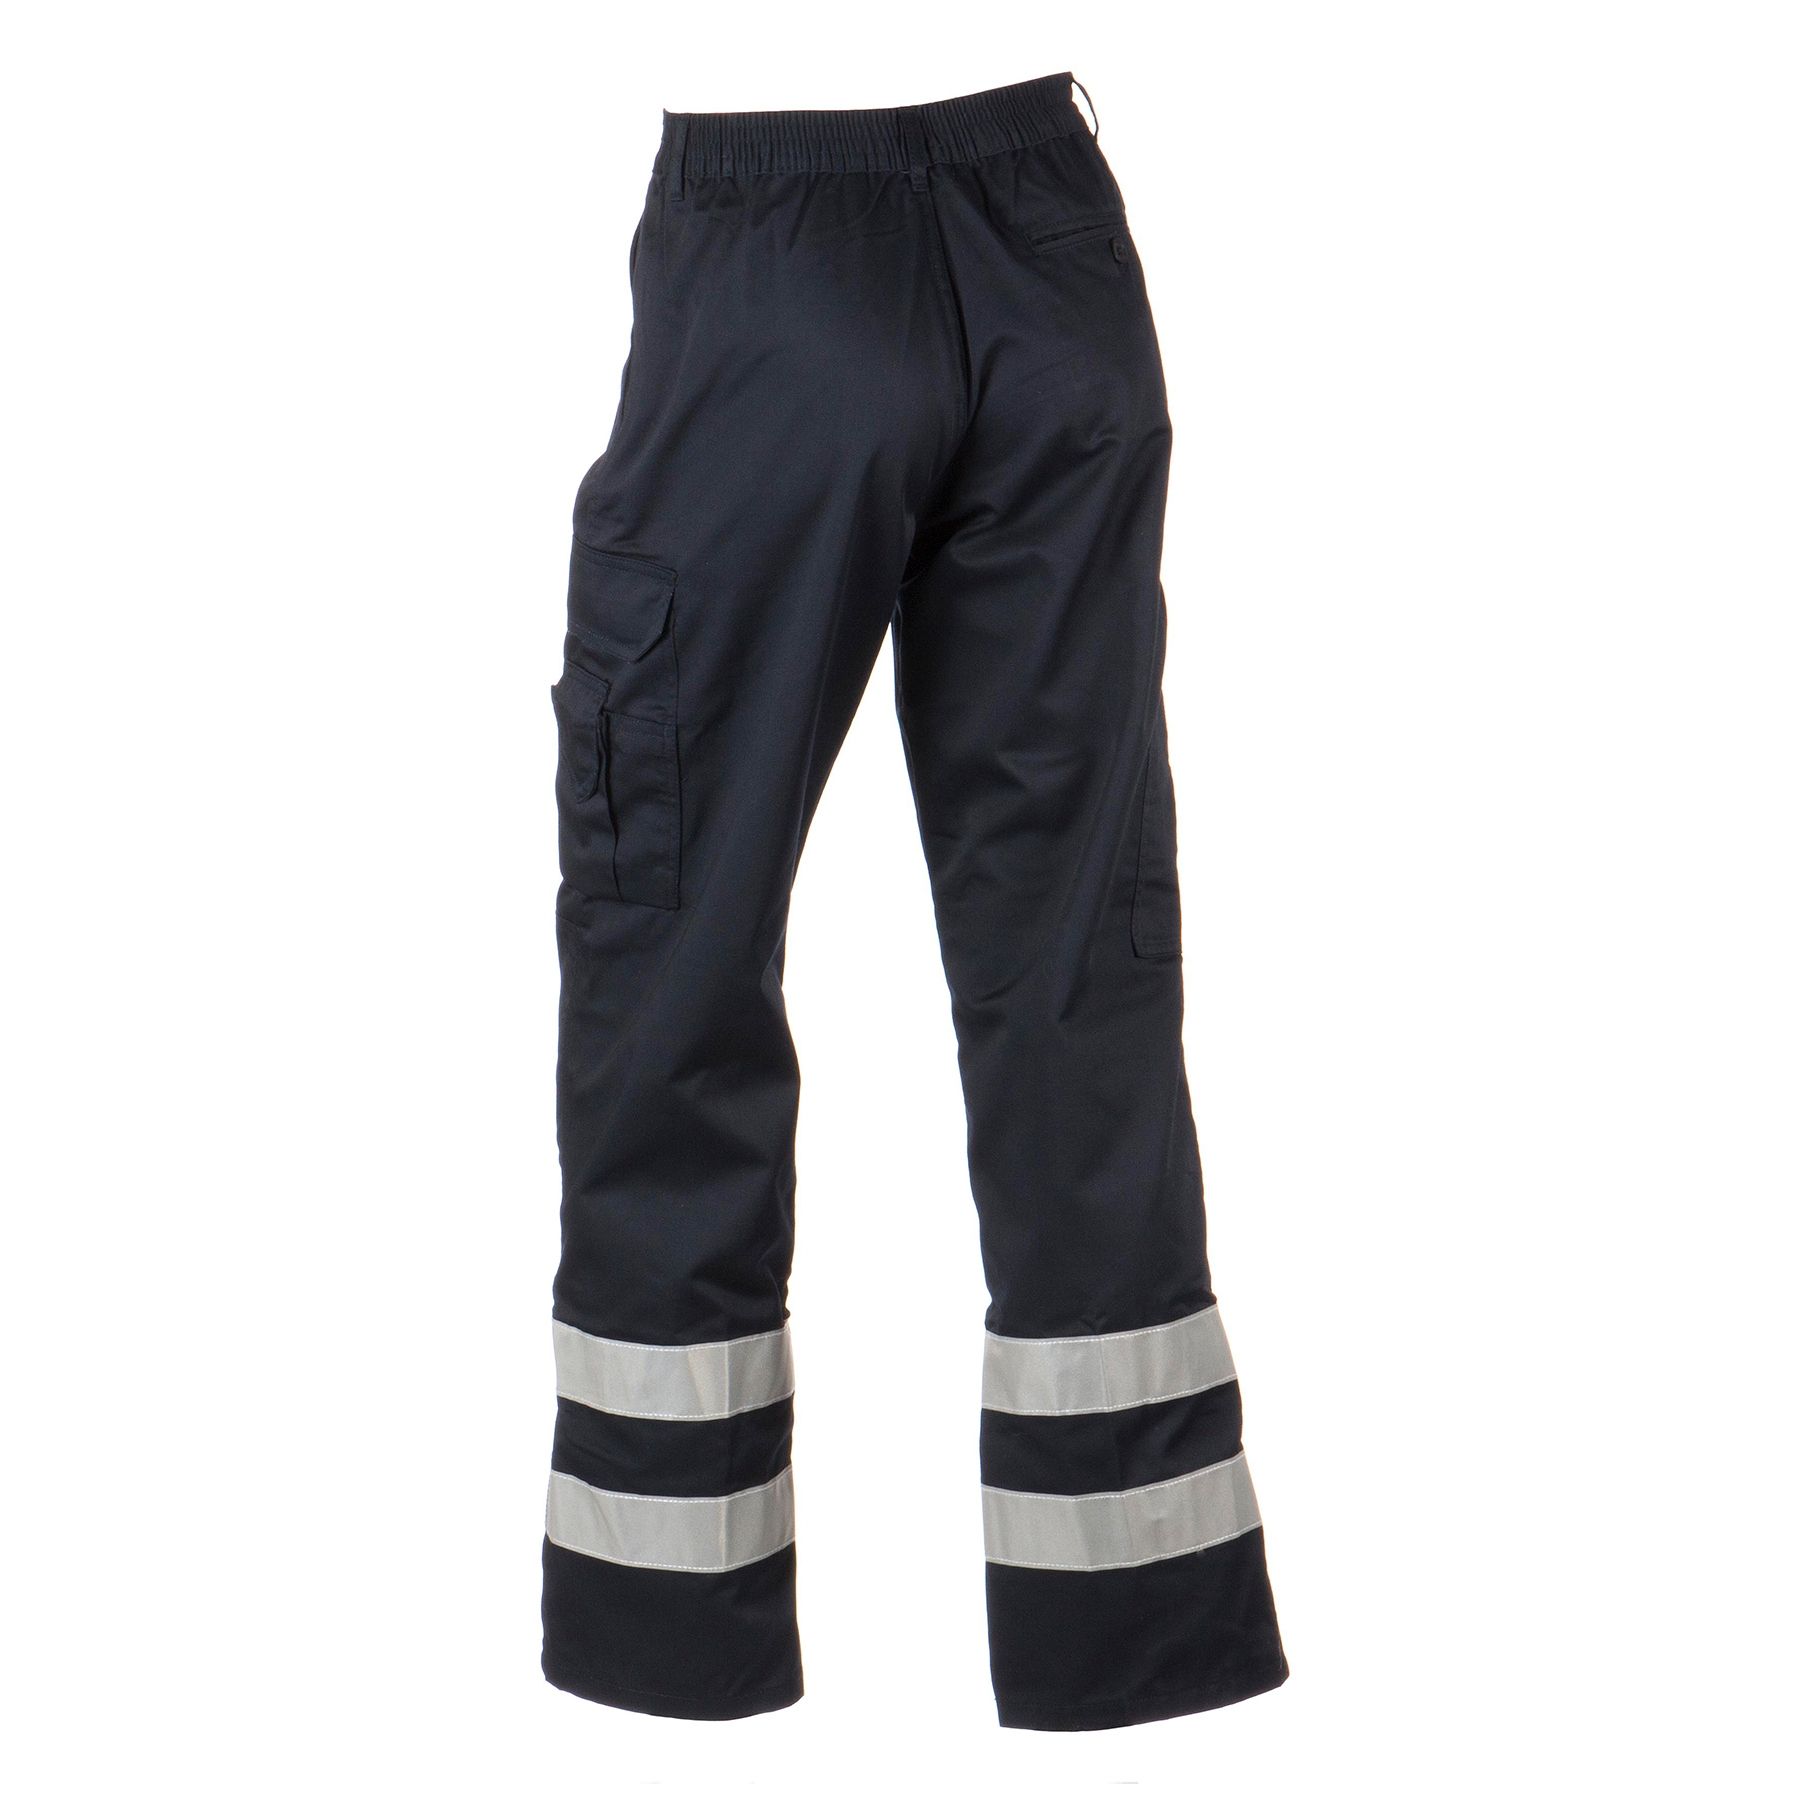 Navy Ballistic Side Protection Work Trousers with Reflective Stripes 